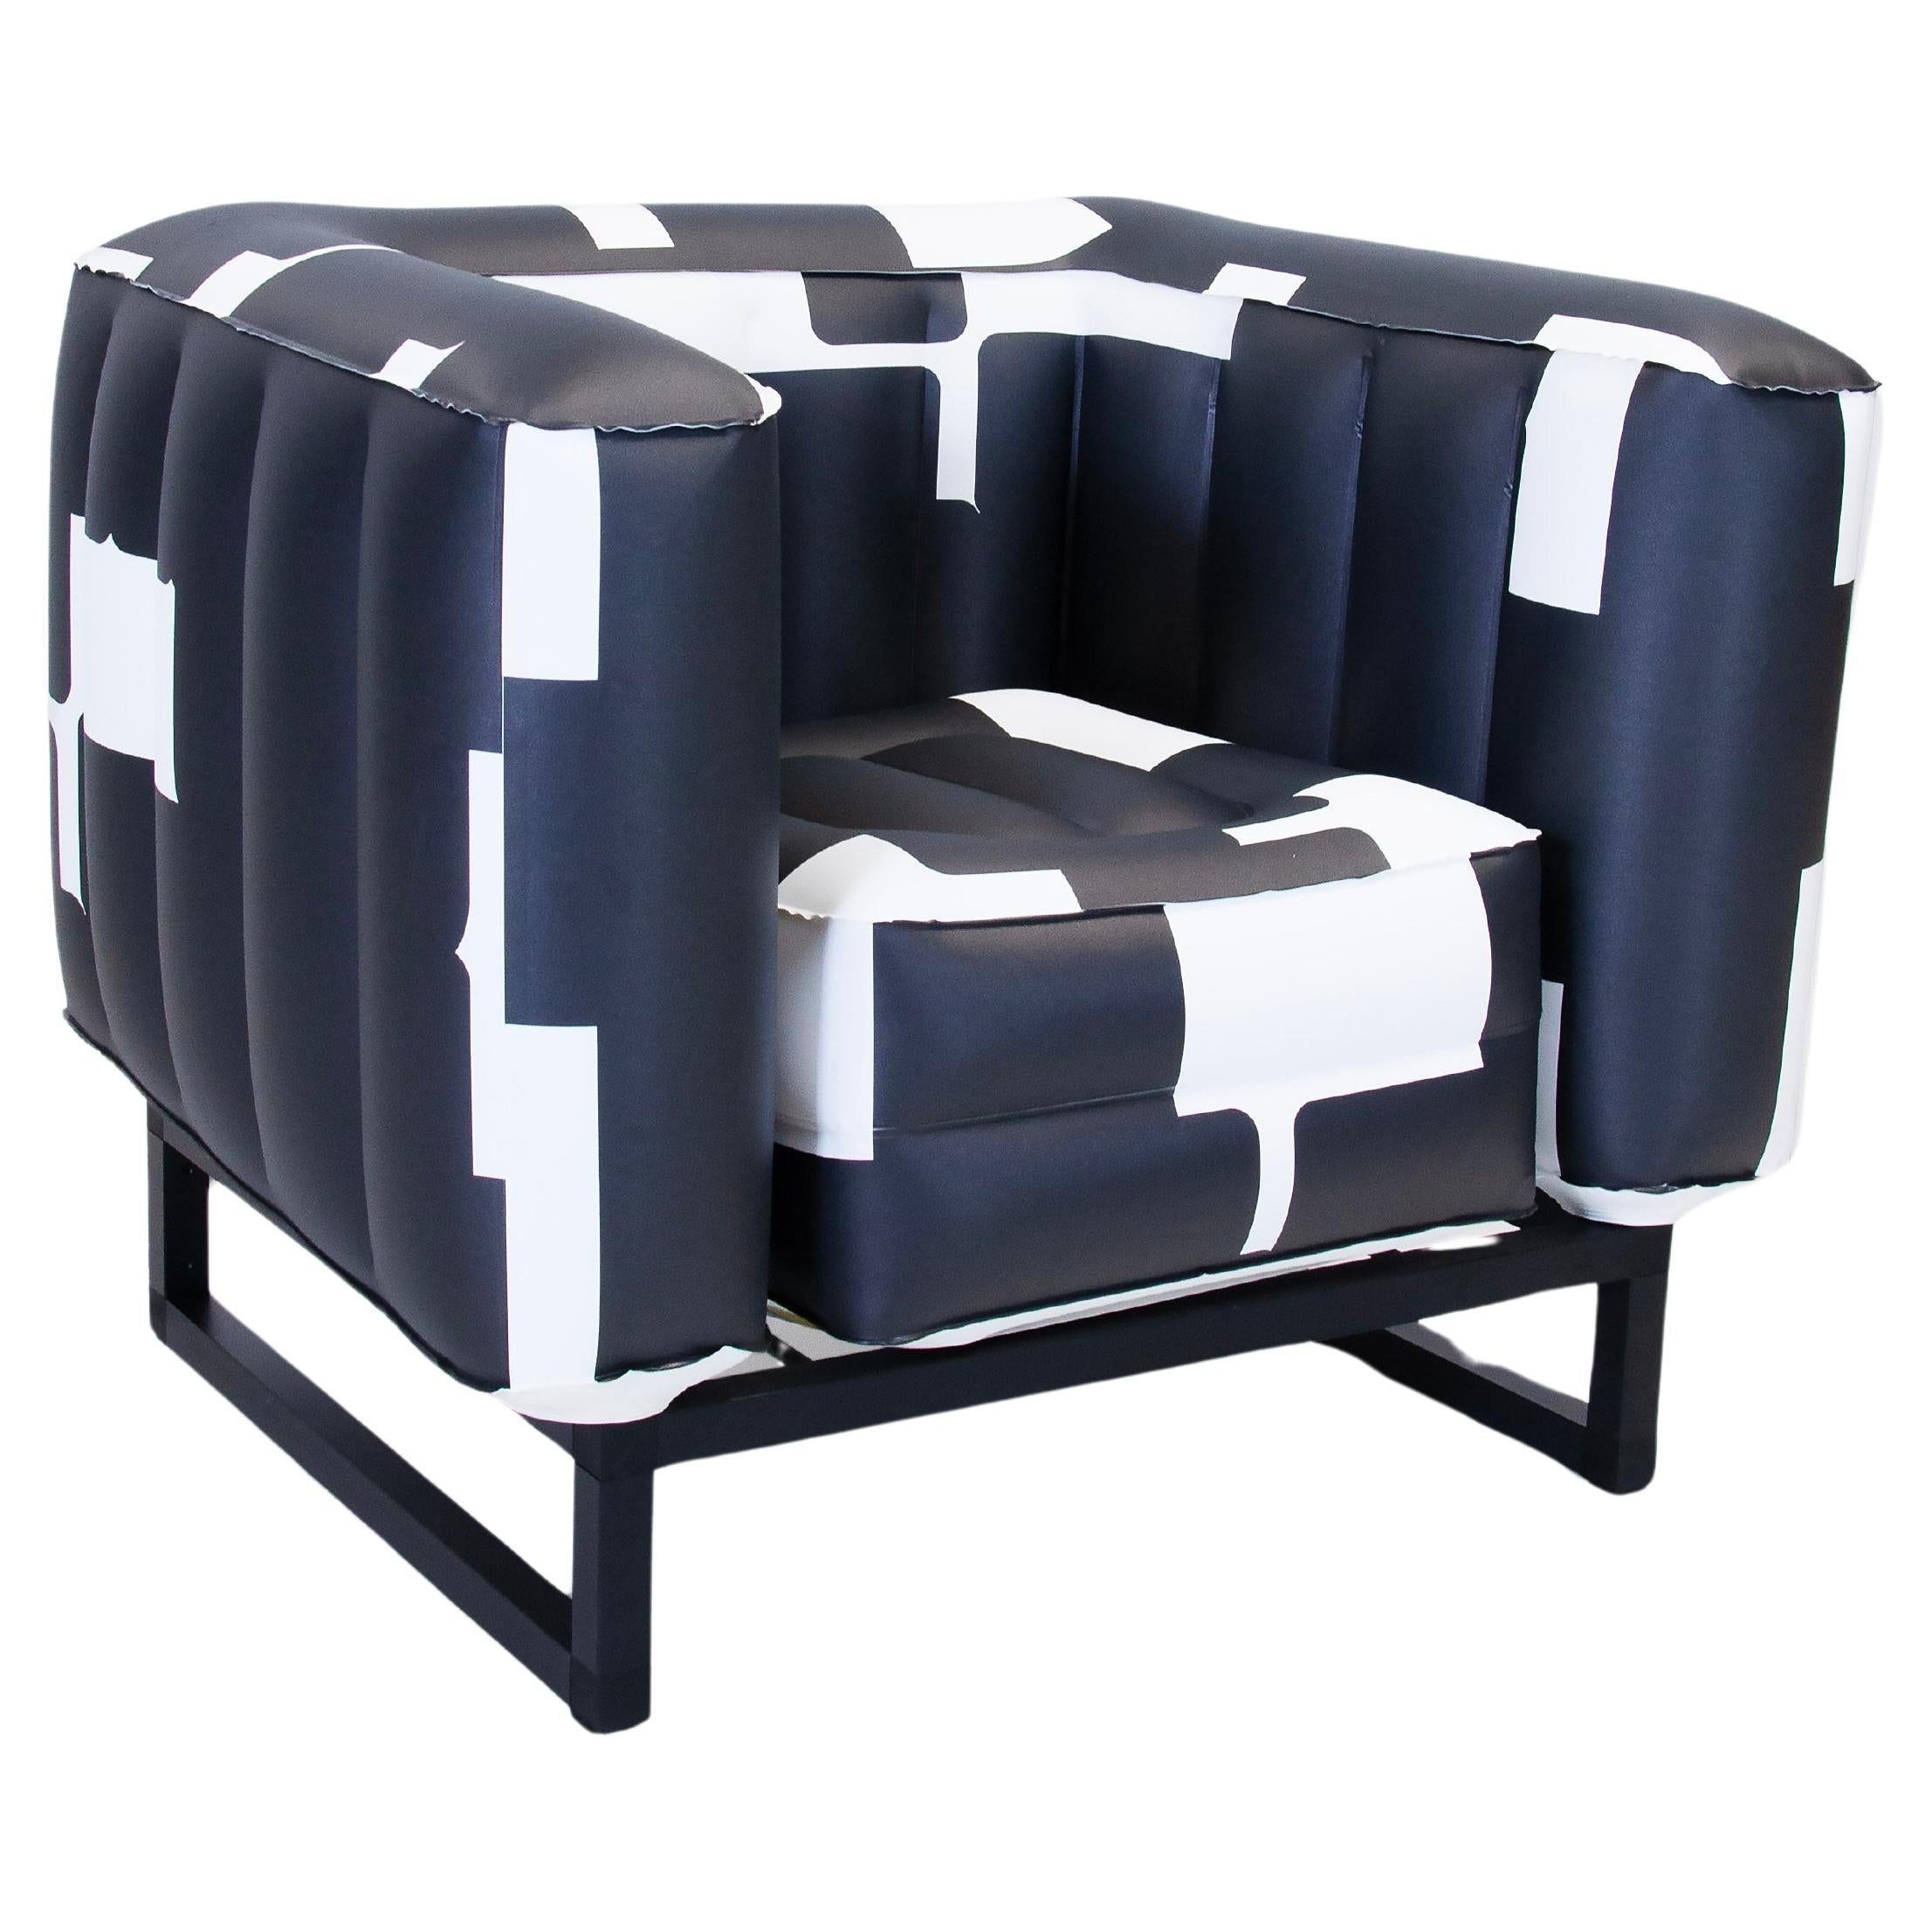 Limited edition "Atelier" Yomi design armchair by Society of Wonderland, 7/50. For Sale